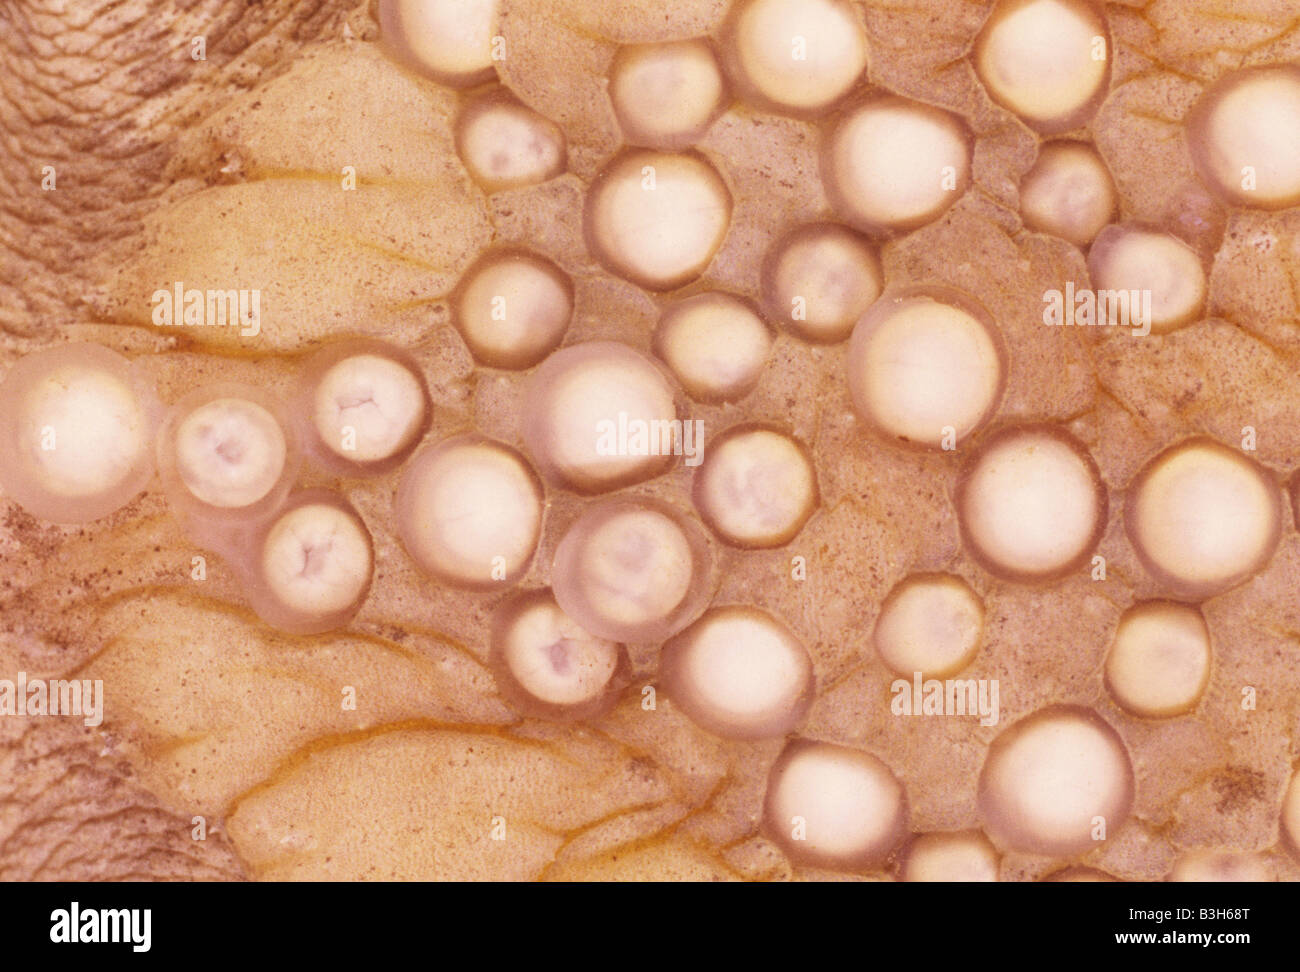 Female Surinam toad Pipa pipa showing detail of eggs adhering to her back 6 hours after oviposition Stock Photo